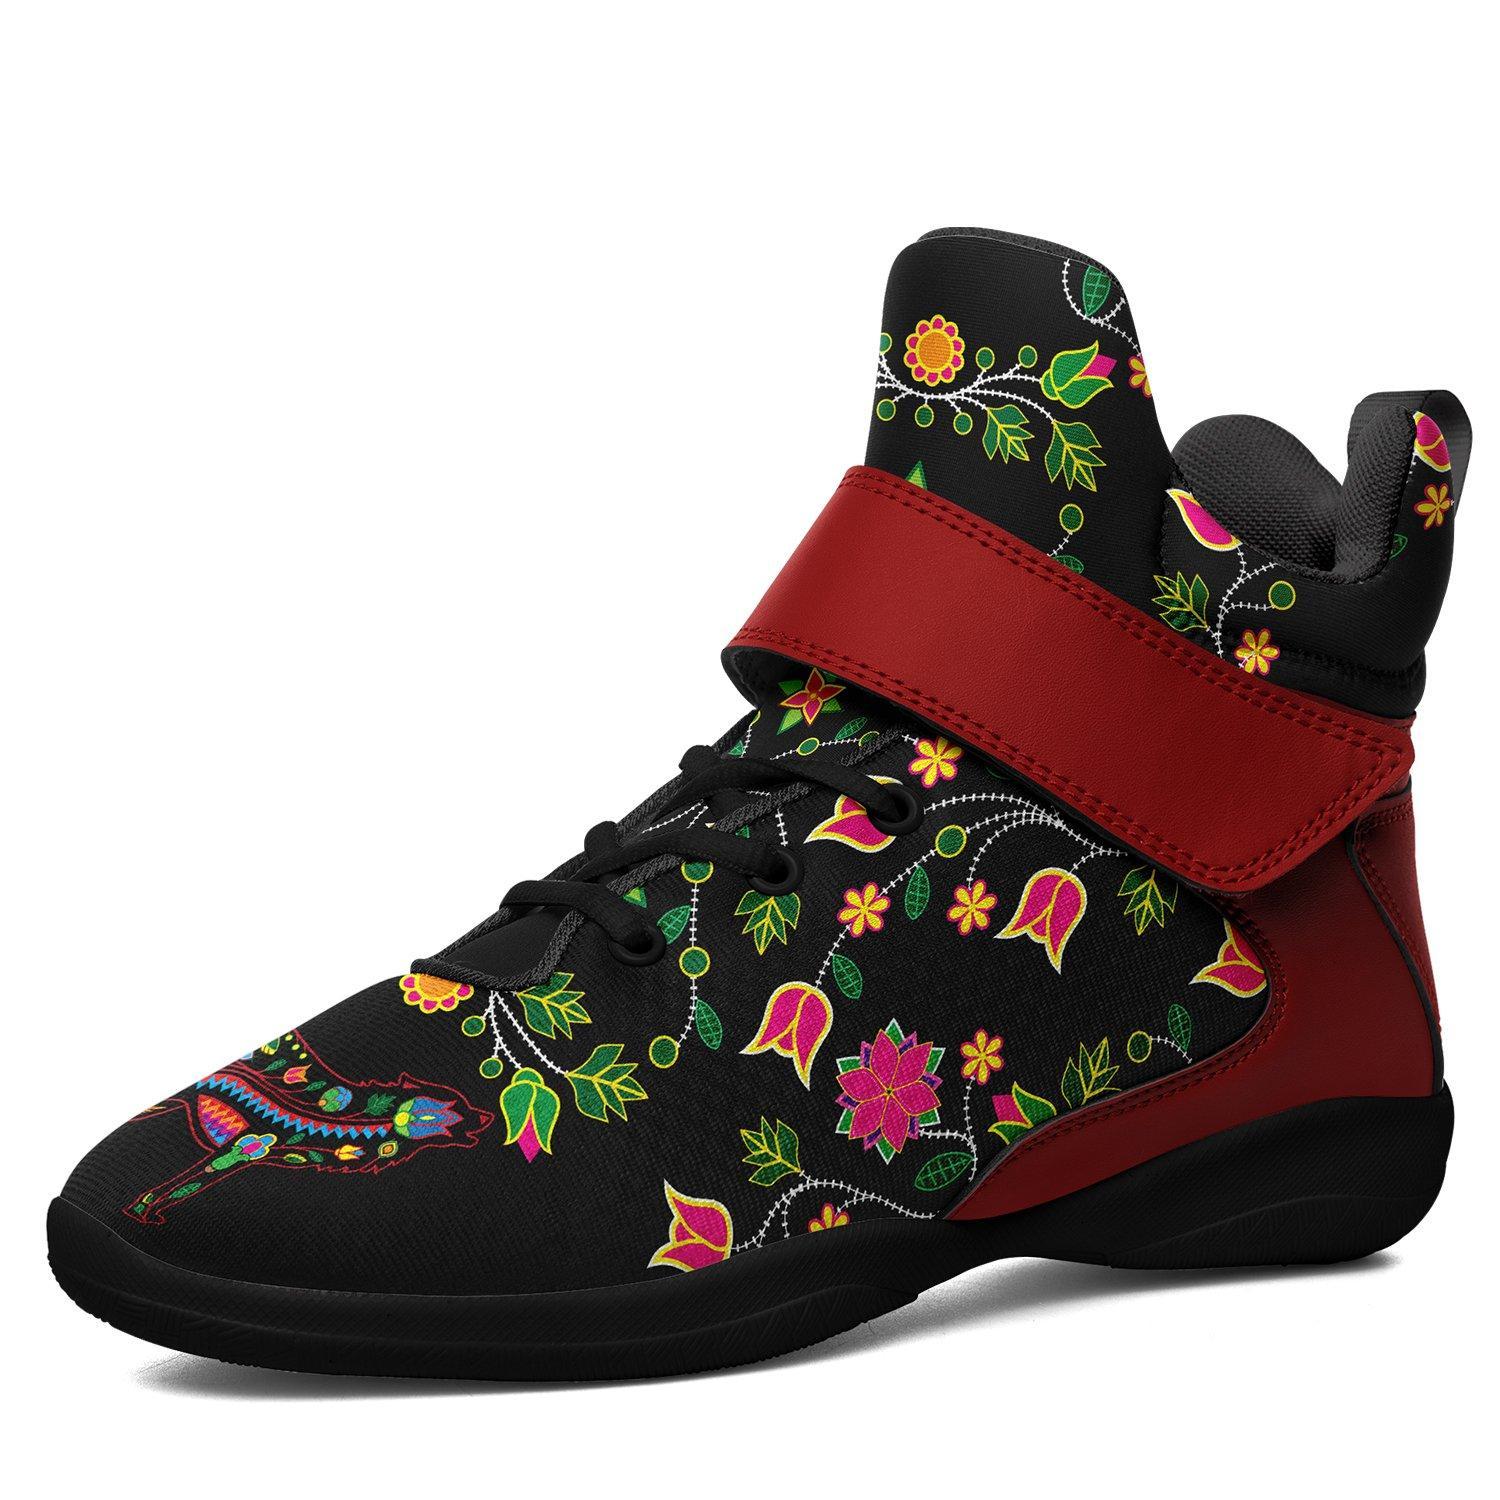 Floral Wolf Ipottaa Basketball / Sport High Top Shoes - Black Sole 49 Dzine US Men 7 / EUR 40 Black Sole with Dark Red Strap 